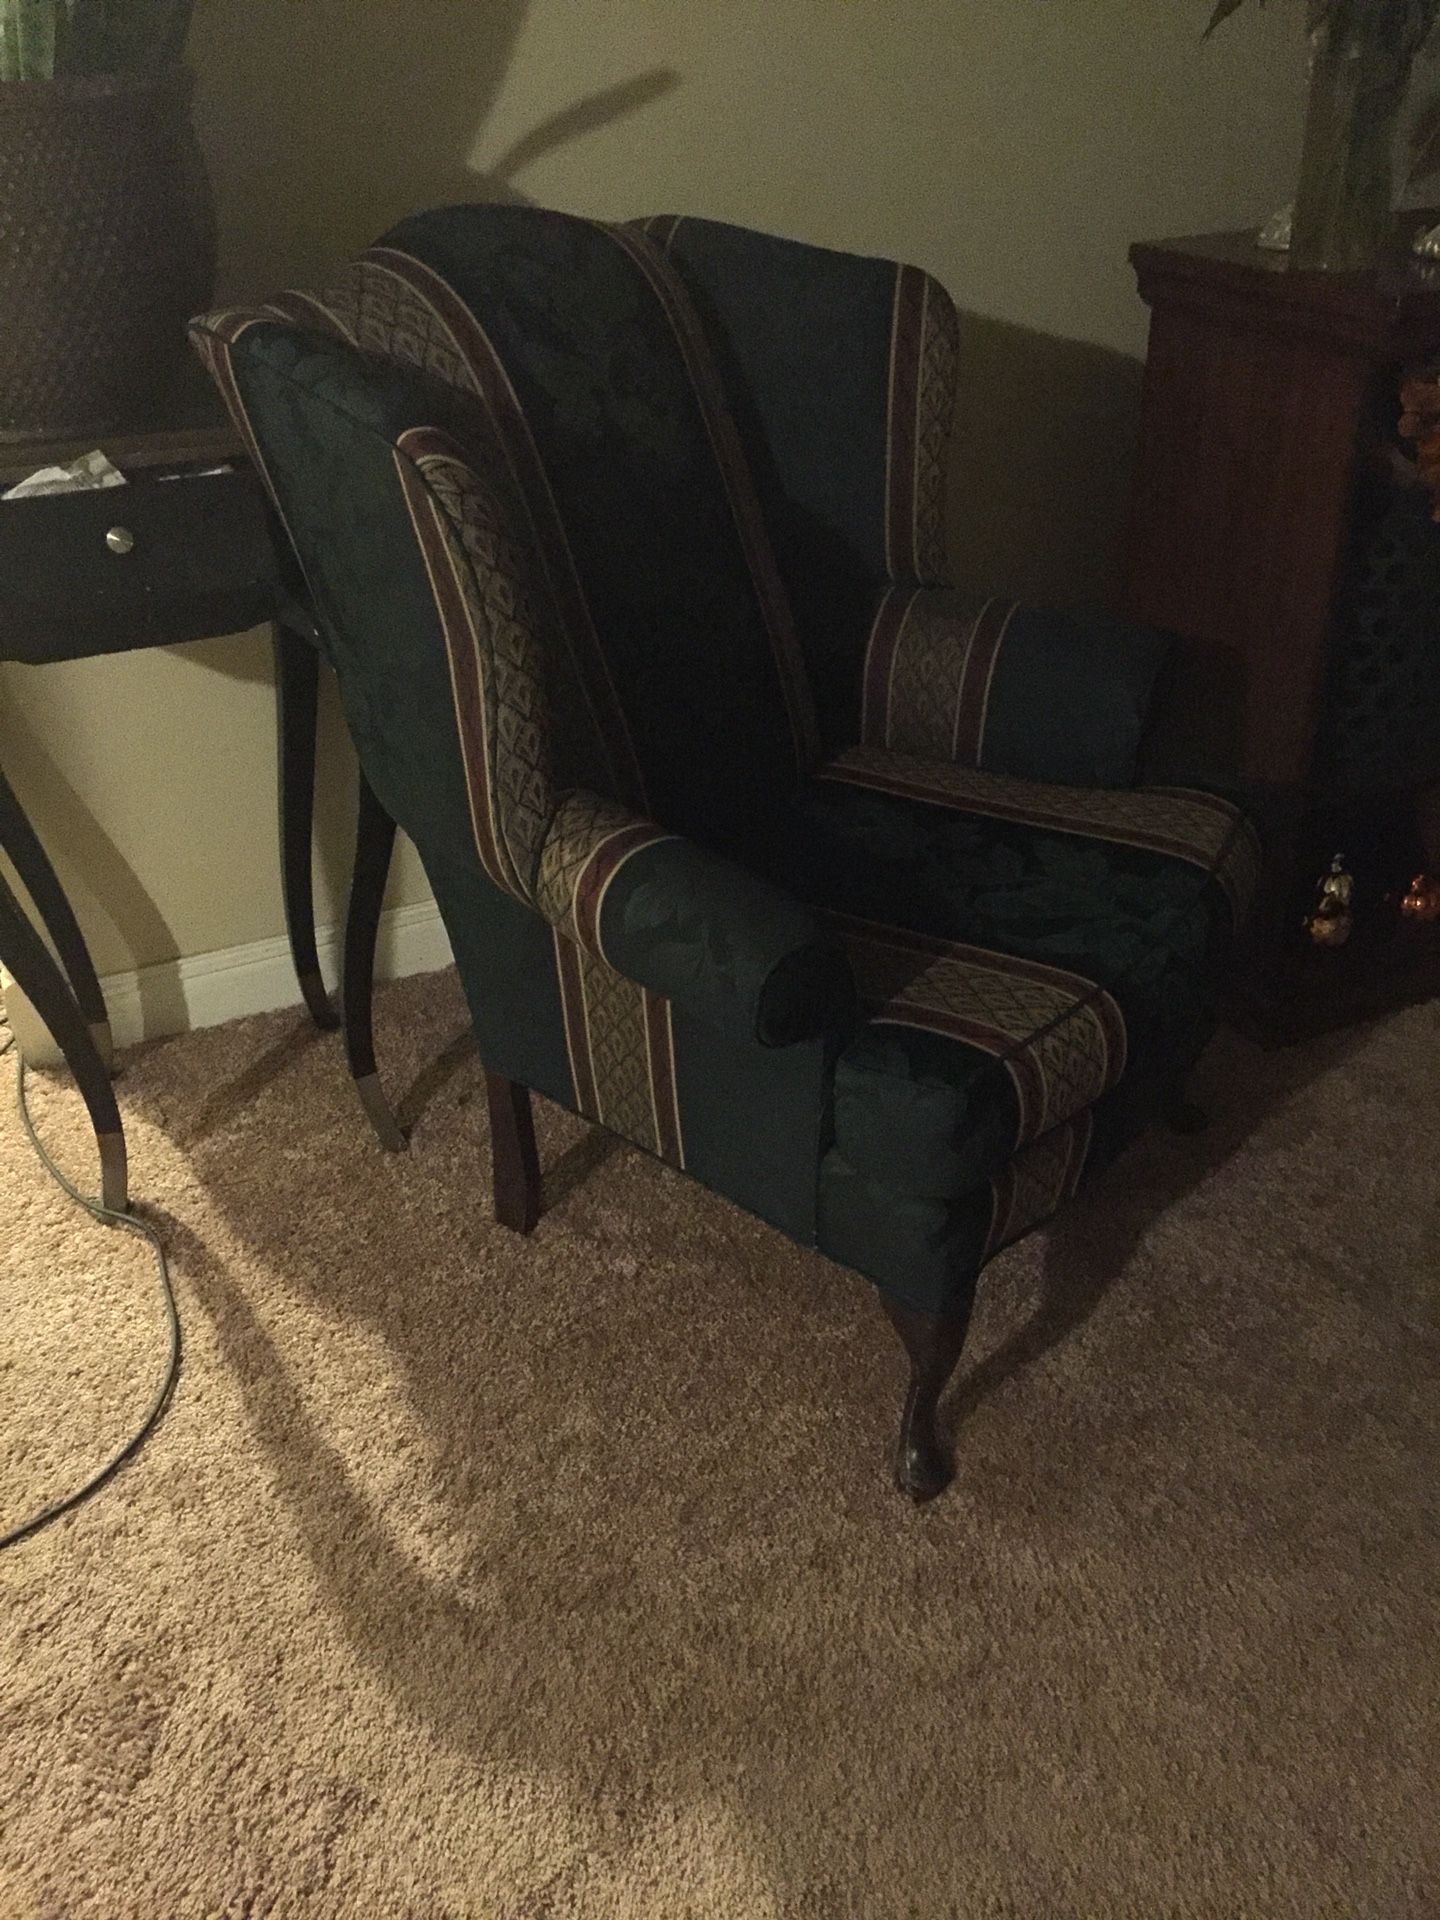 2 wing back chairs for sale with Brown cover to keep clean